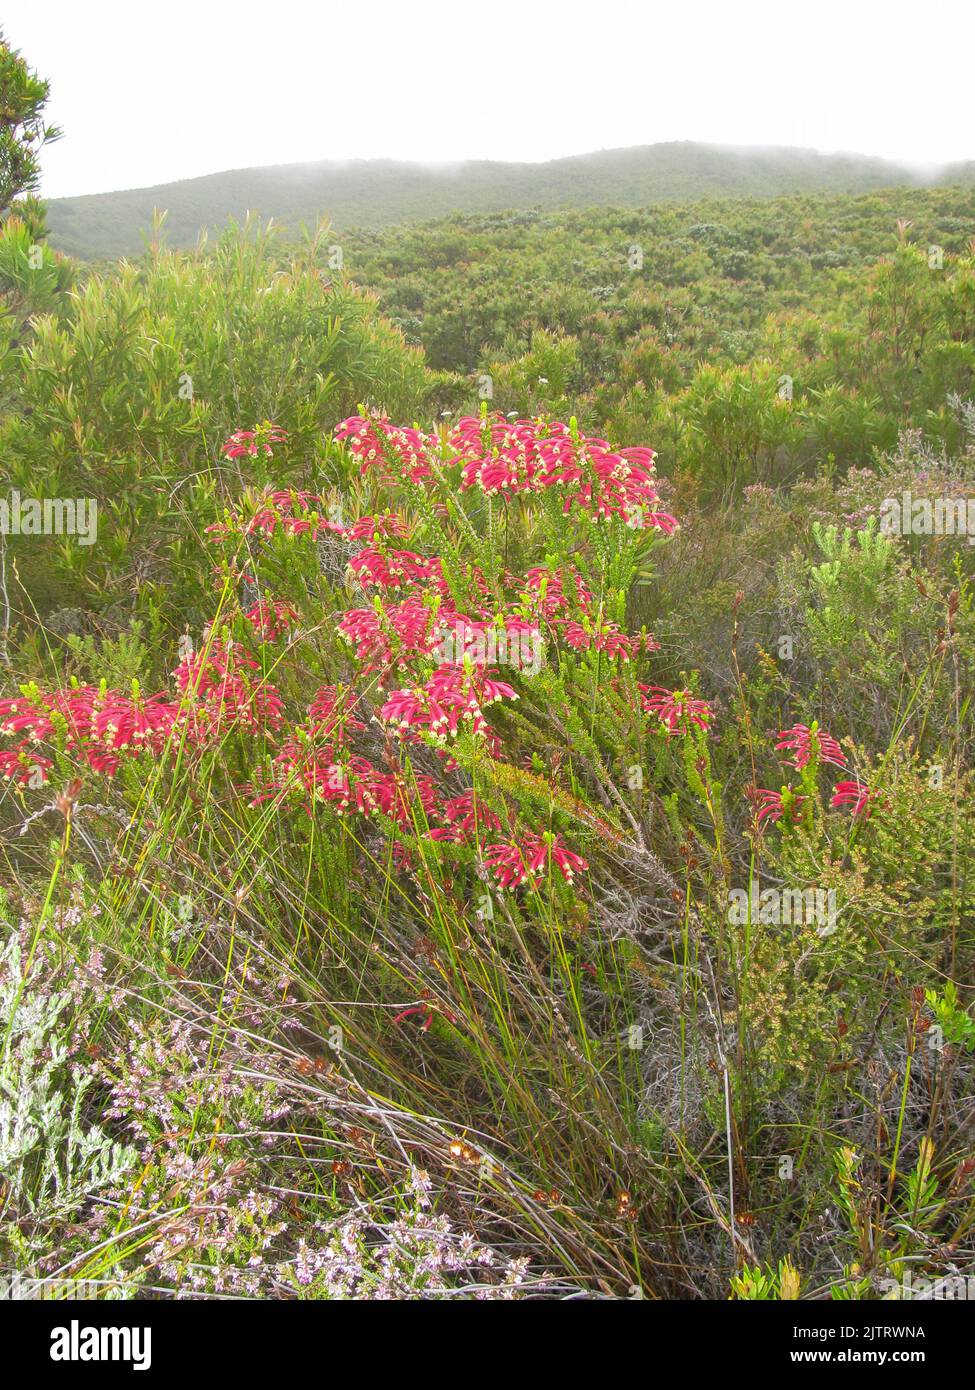 Erica Densifolia, commonly known as Harlequin Heath, in full bloom, with the Tstikamma mountains, South Africa, shrouded in mist in the background. Stock Photo